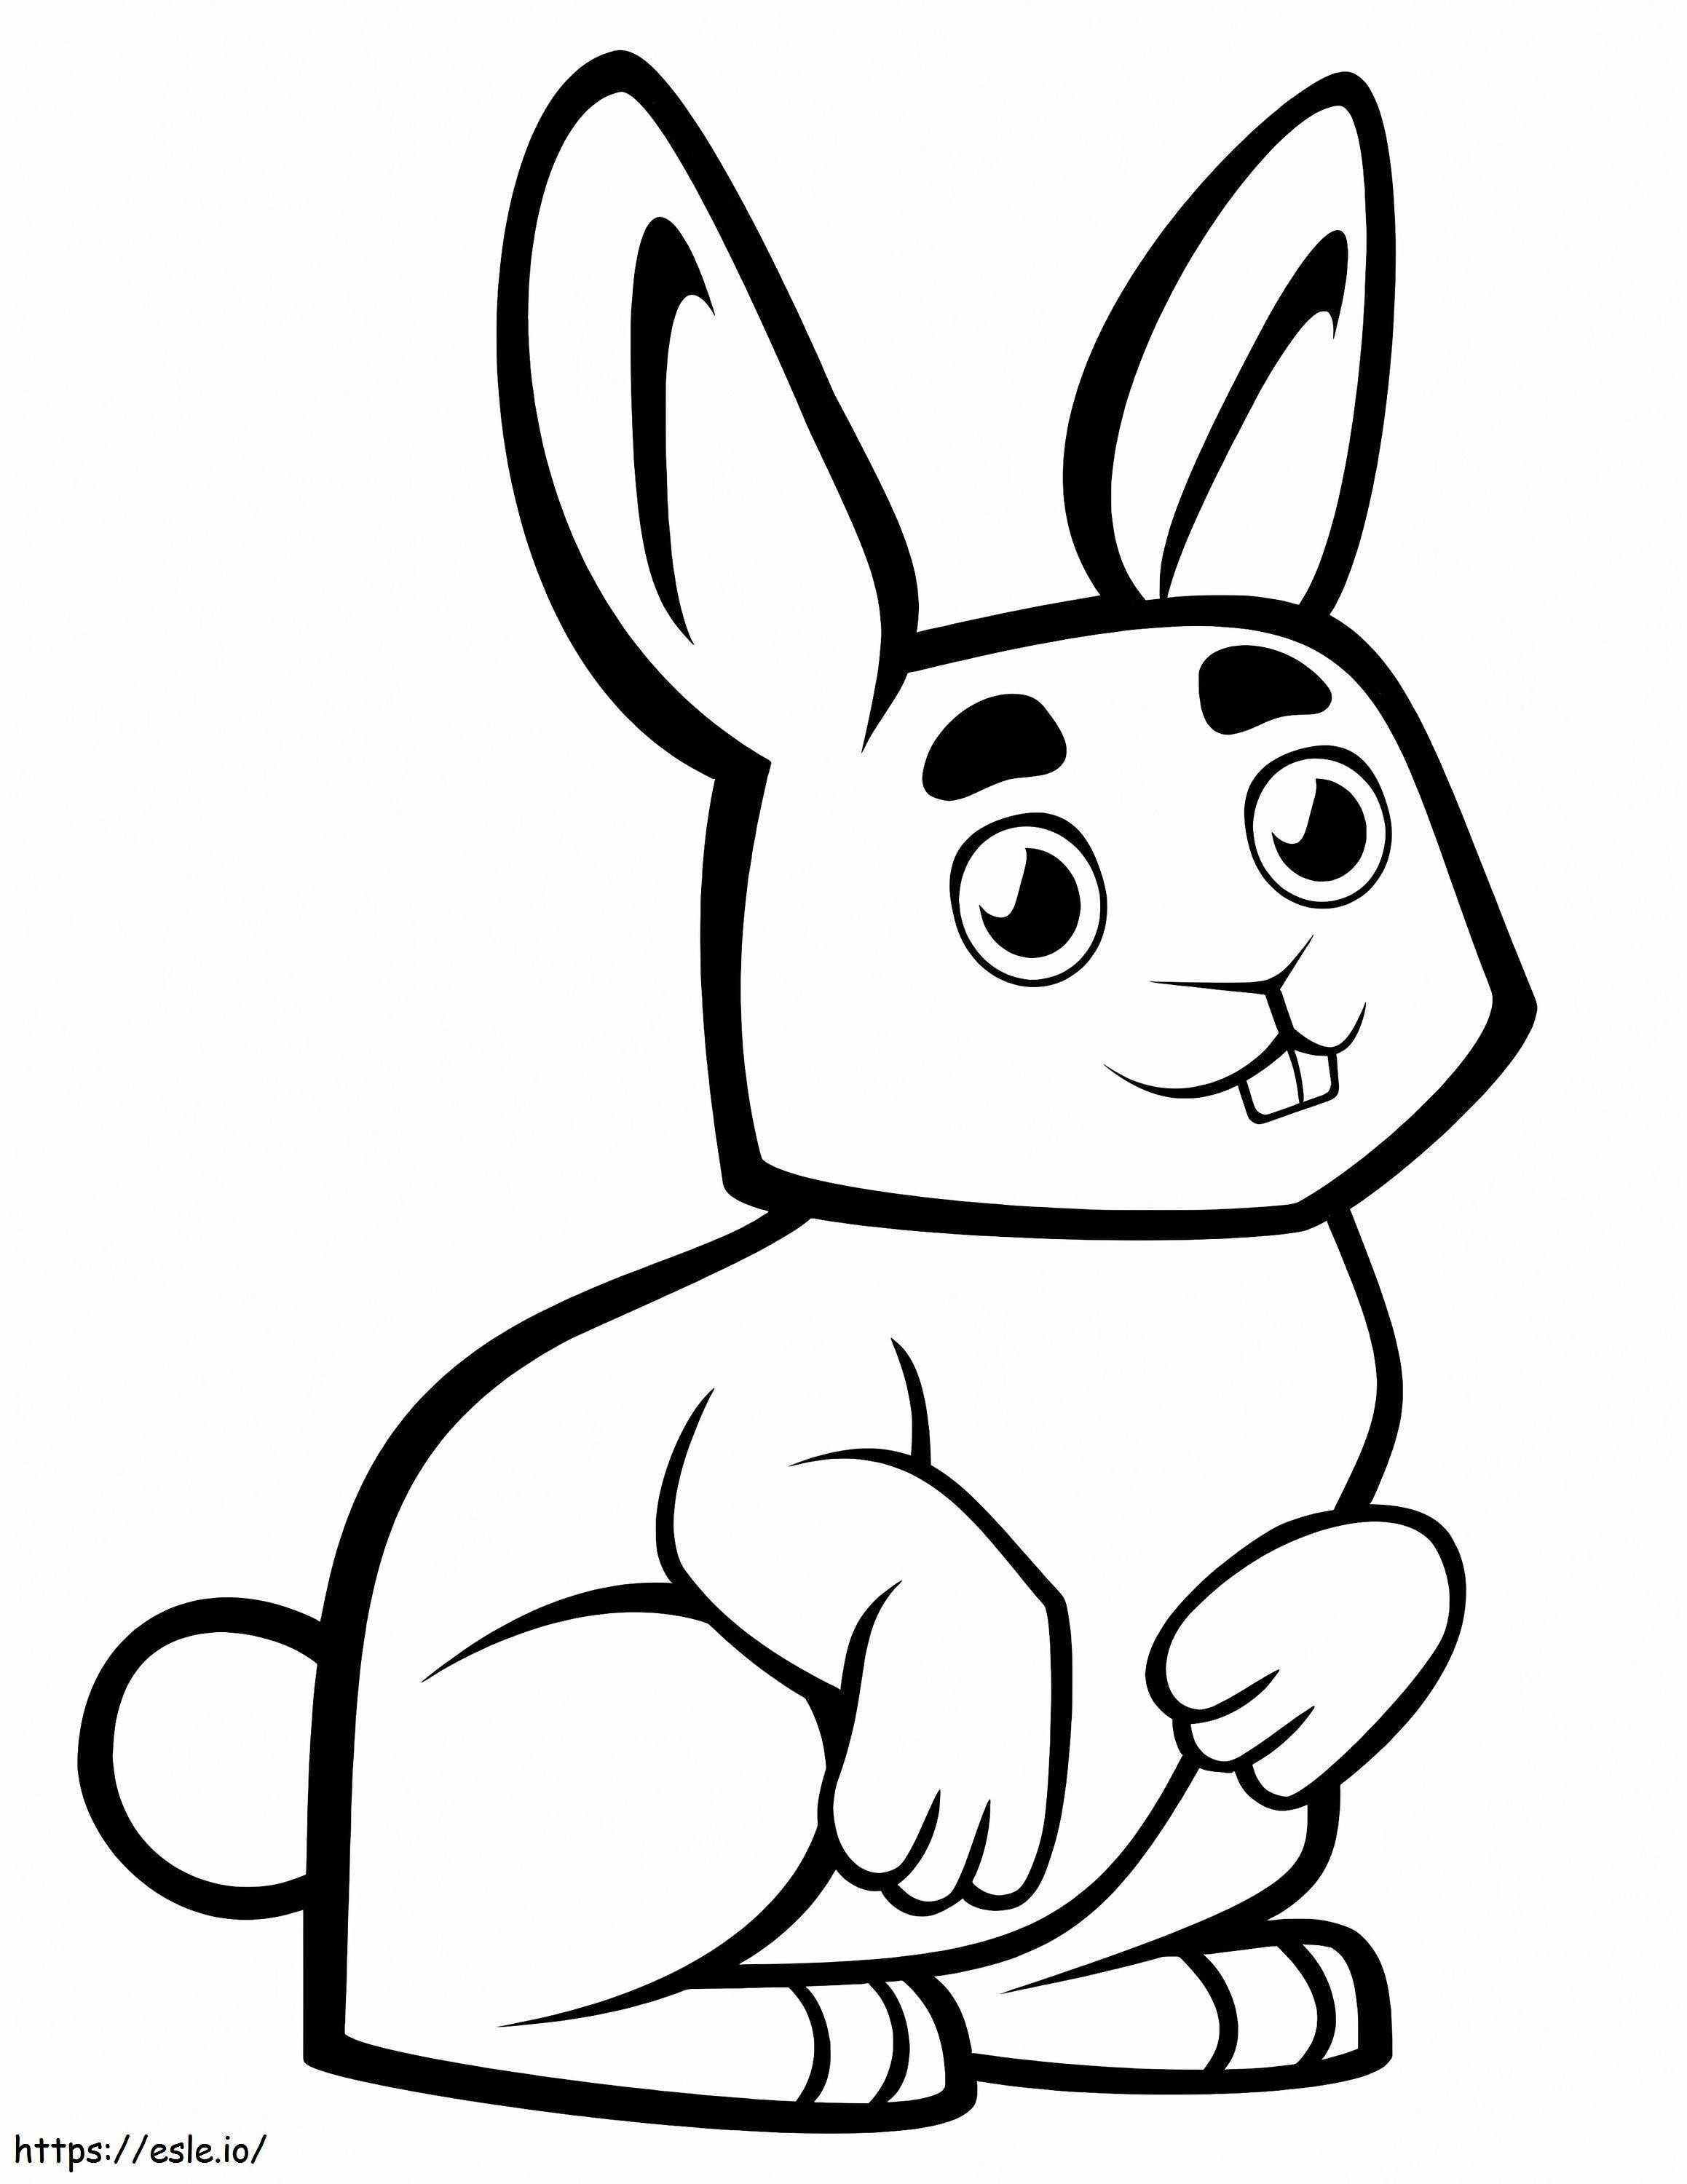 Cute Little Rabbit Cartoon Style coloring page